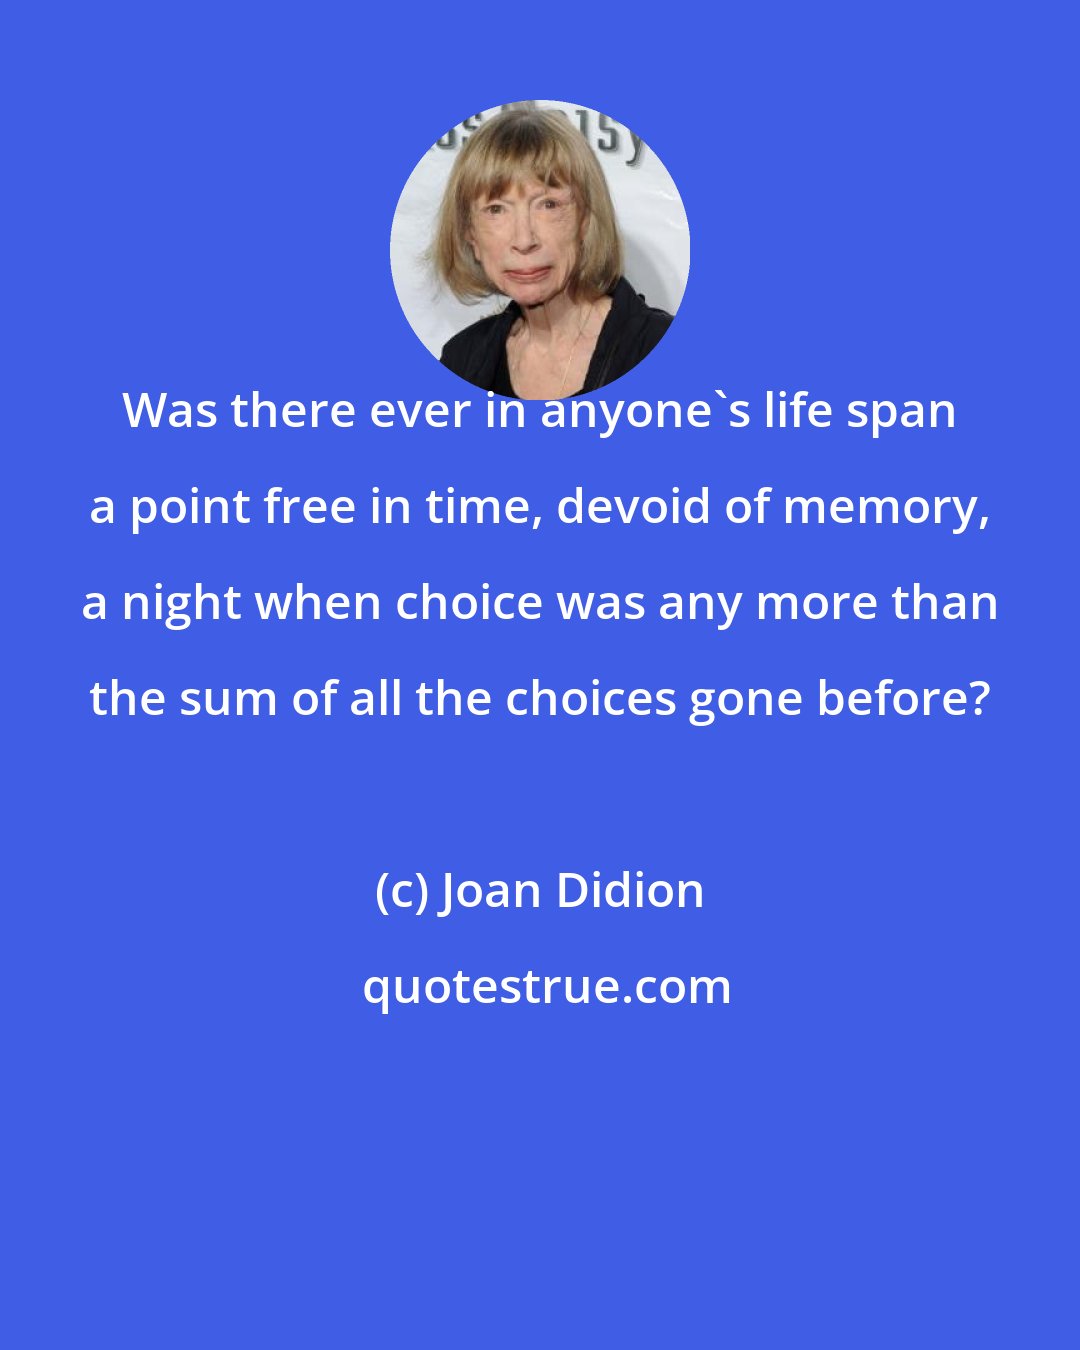 Joan Didion: Was there ever in anyone's life span a point free in time, devoid of memory, a night when choice was any more than the sum of all the choices gone before?